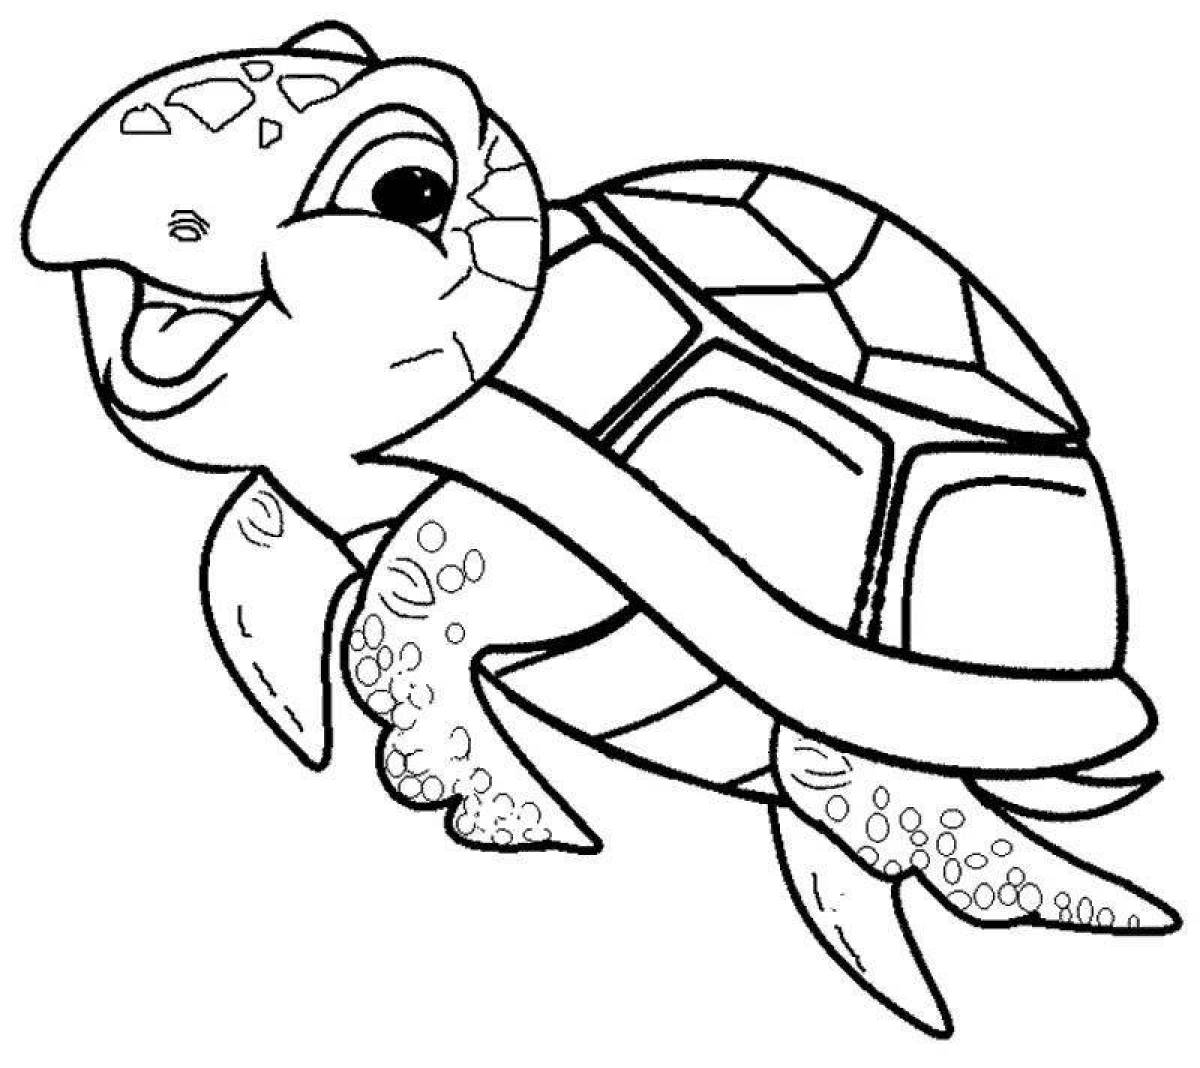 Magic turtle coloring book for kids